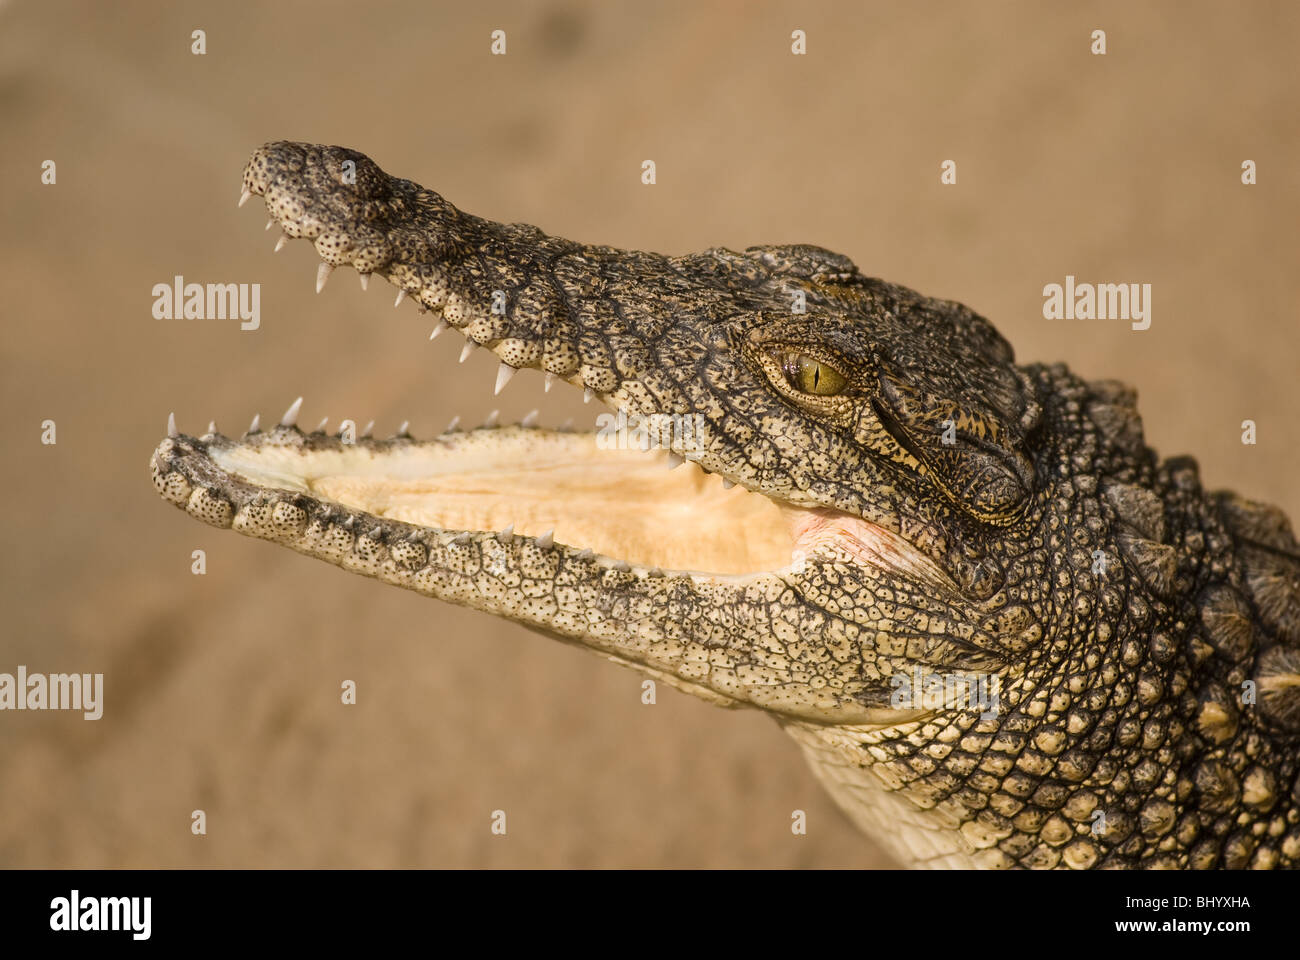 Nile Crocodile (Crocodylus niloticus) opening its jaws in the sun and exposing its teeth, St Lucia, Kwazulu Natal, South Africa Stock Photo